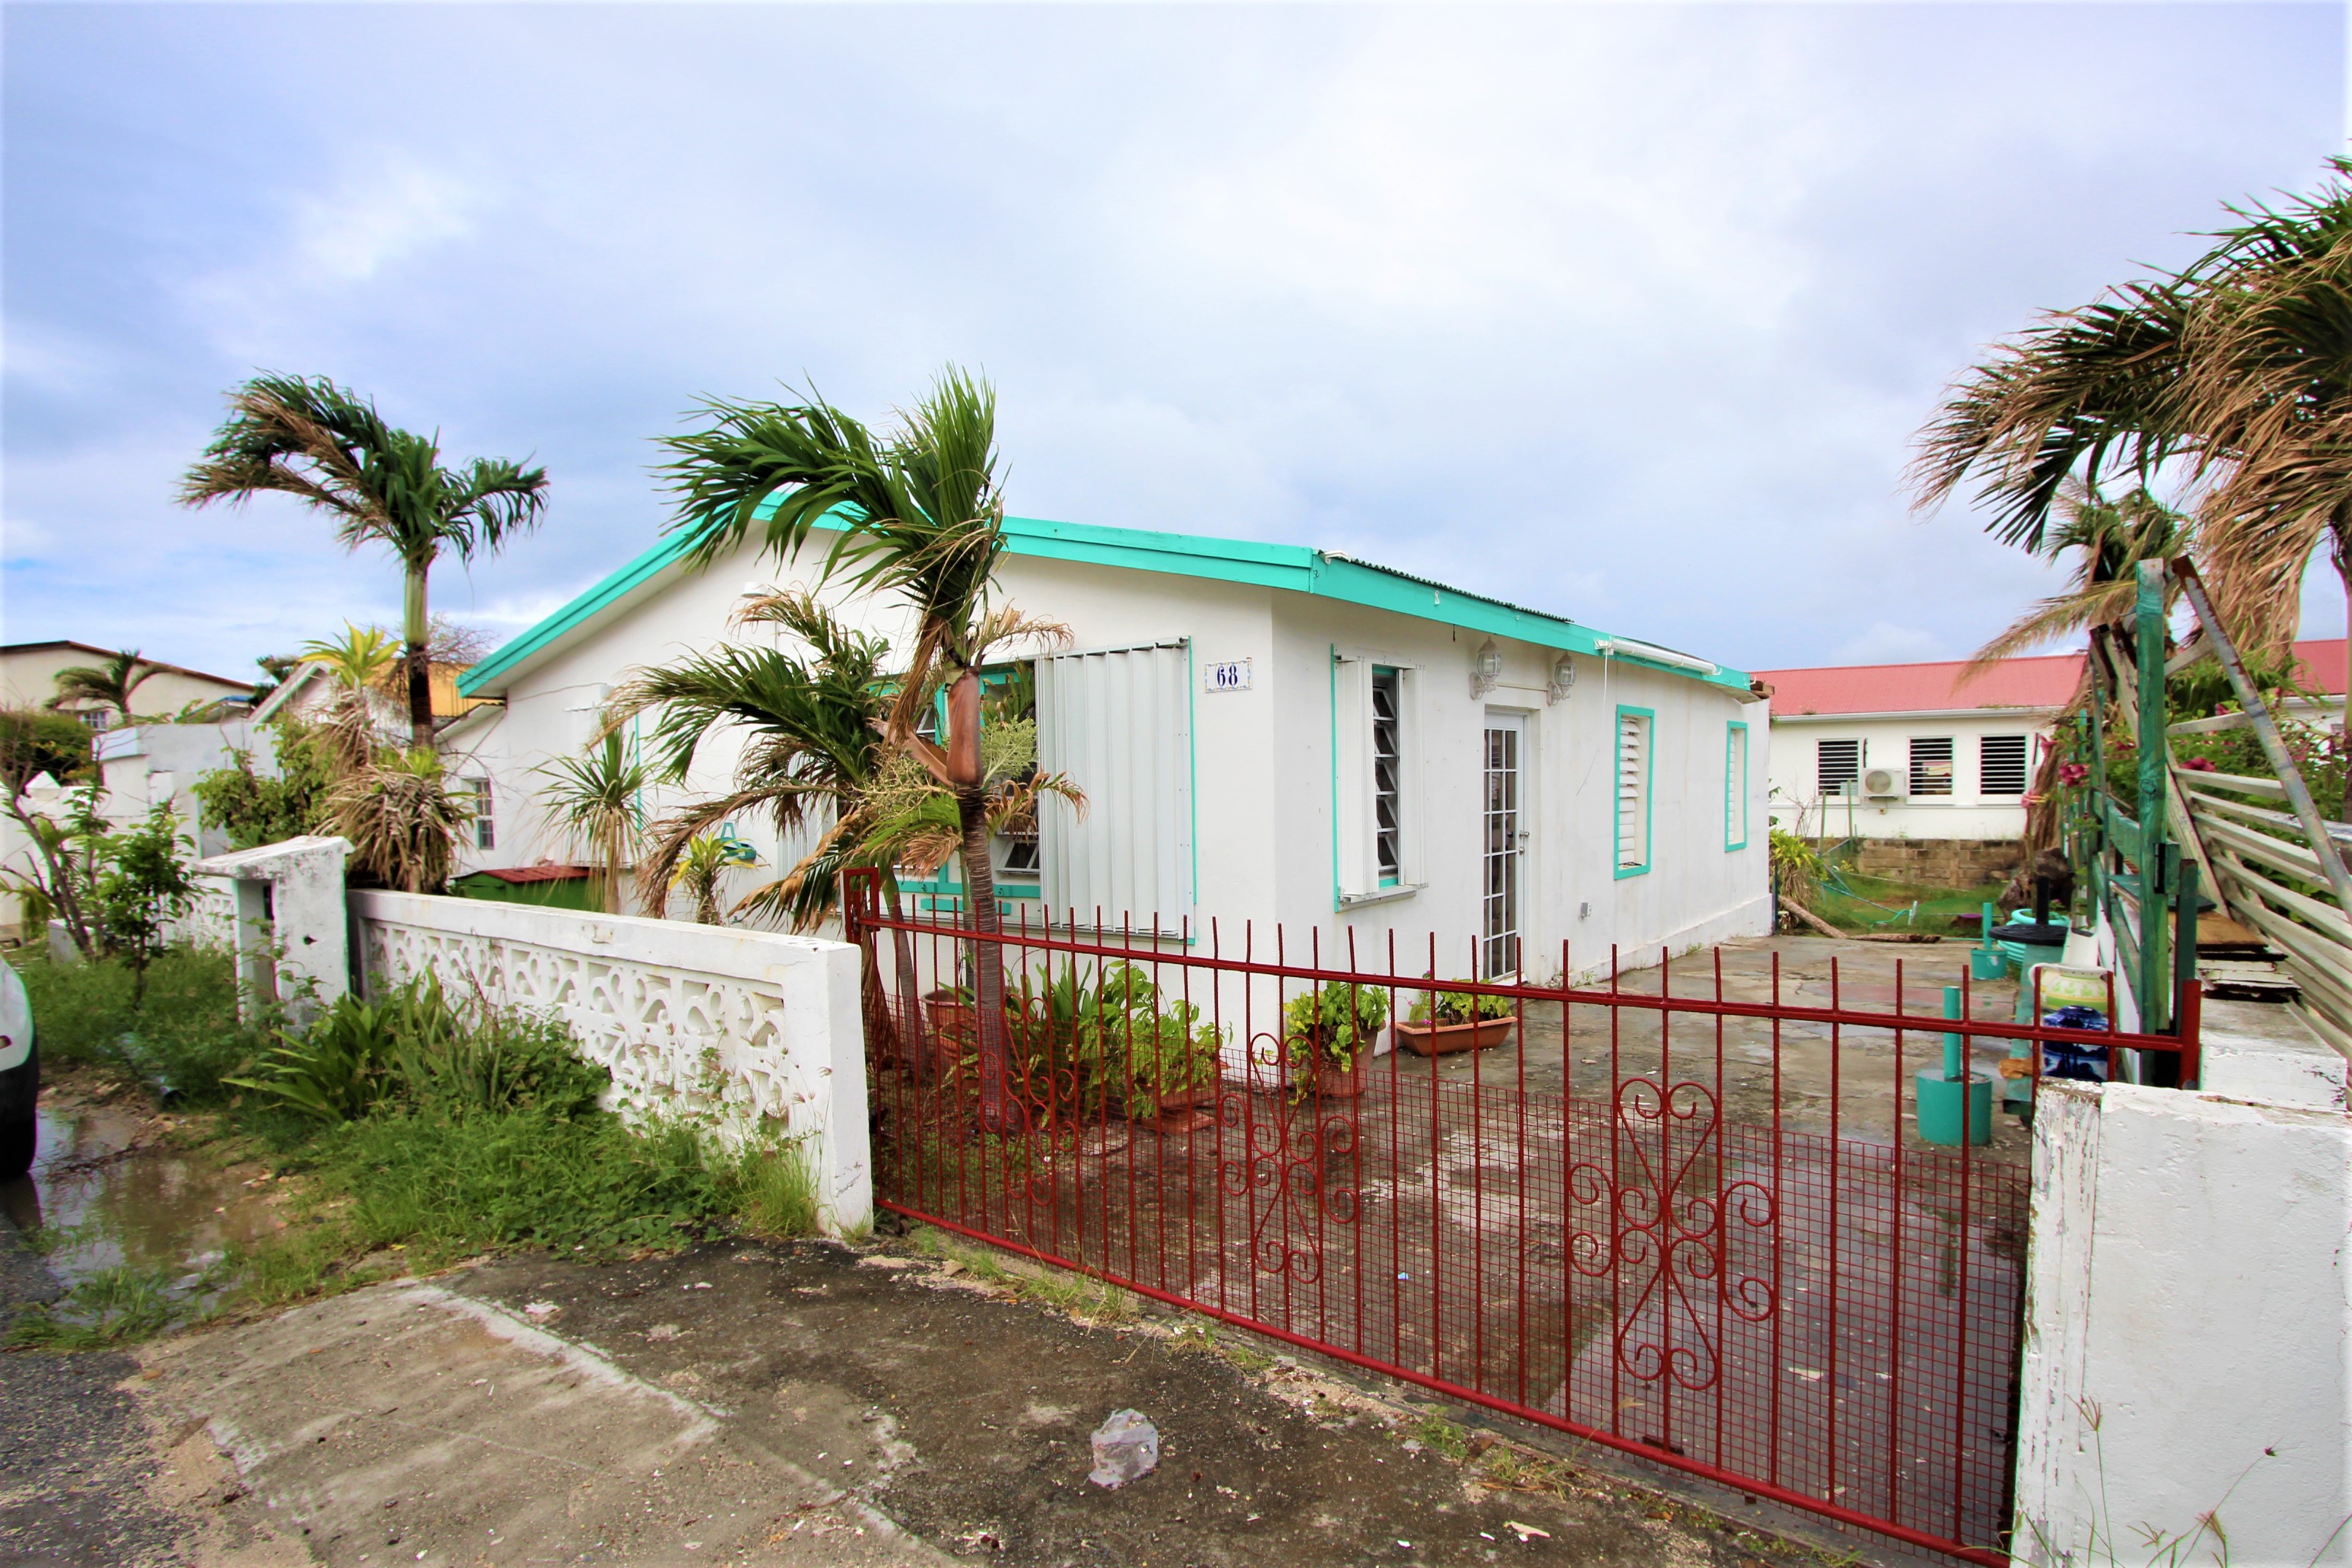 Simpson Bay Investment Property